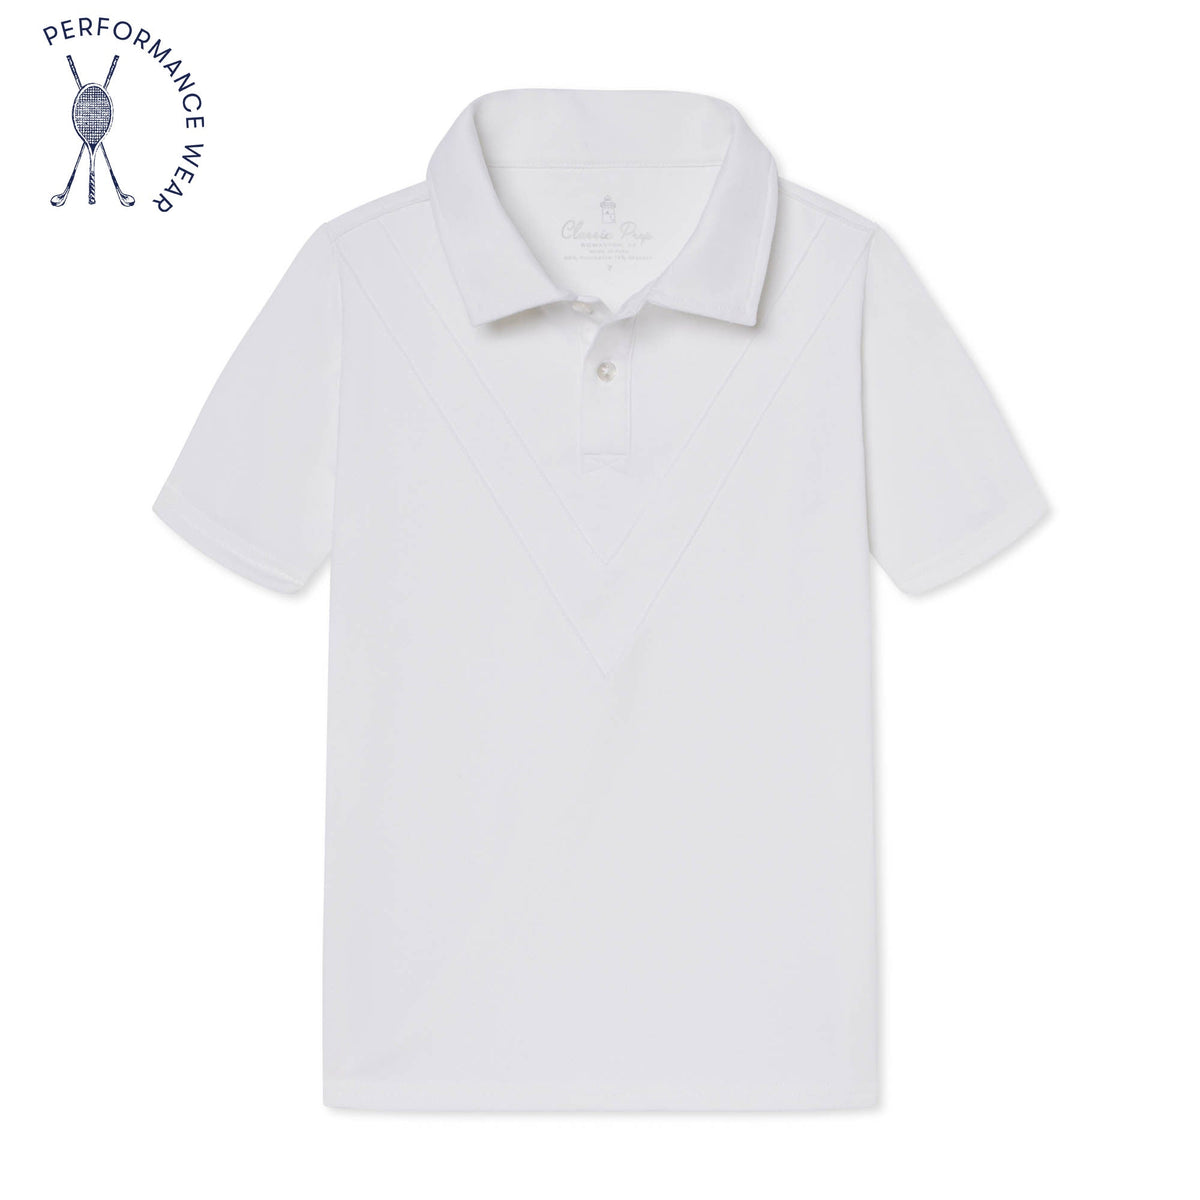 Classic and Preppy Terence Tennis Performance Chevron Polo, Bright White-Shirts and Tops-Bright White-2T-CPC - Classic Prep Childrenswear